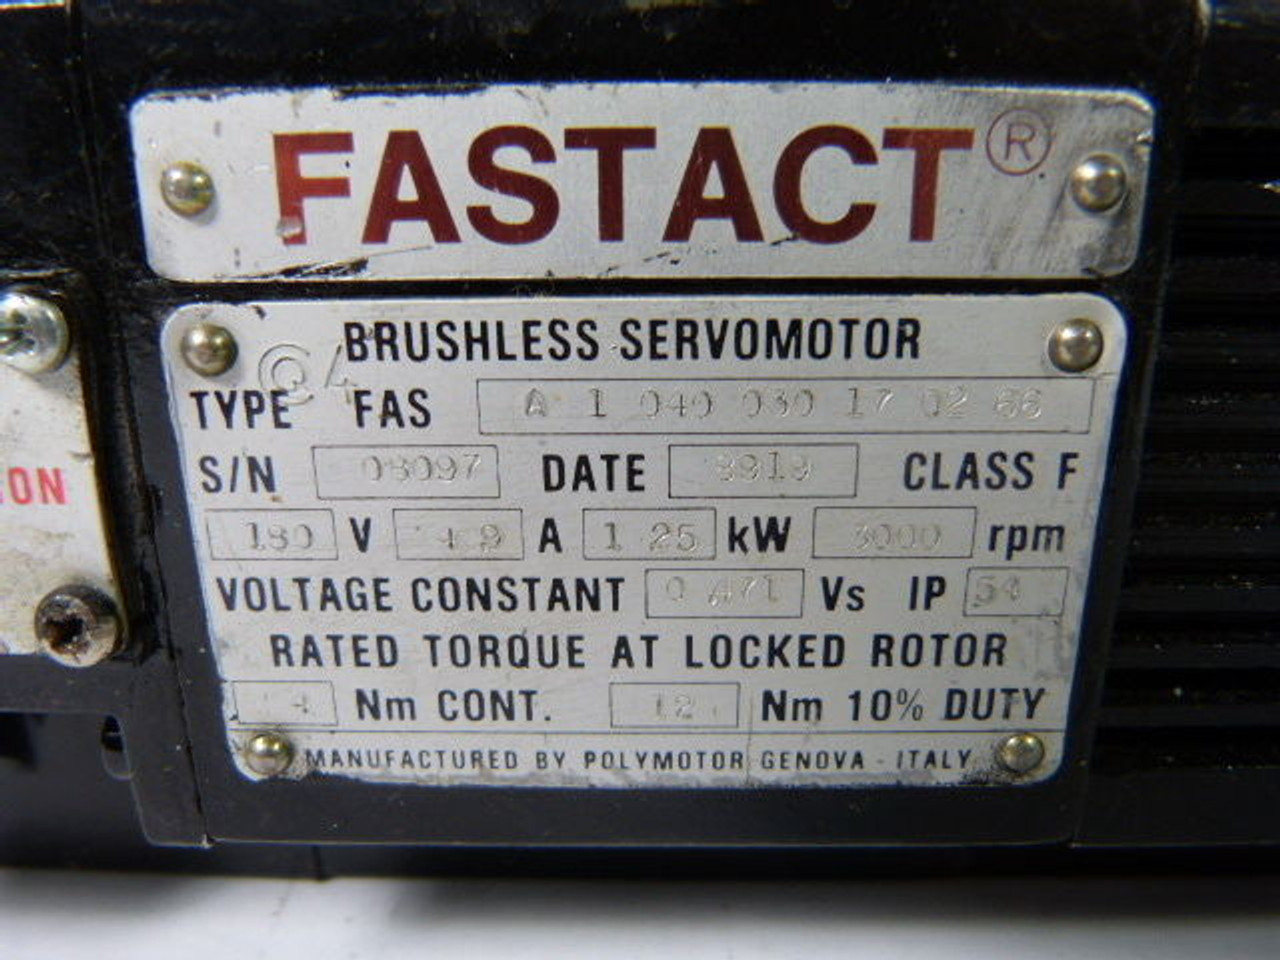 Fastact A1040030170266 Brushless Servo Motor 3000RPM 180V 12Nm 1.9A USED